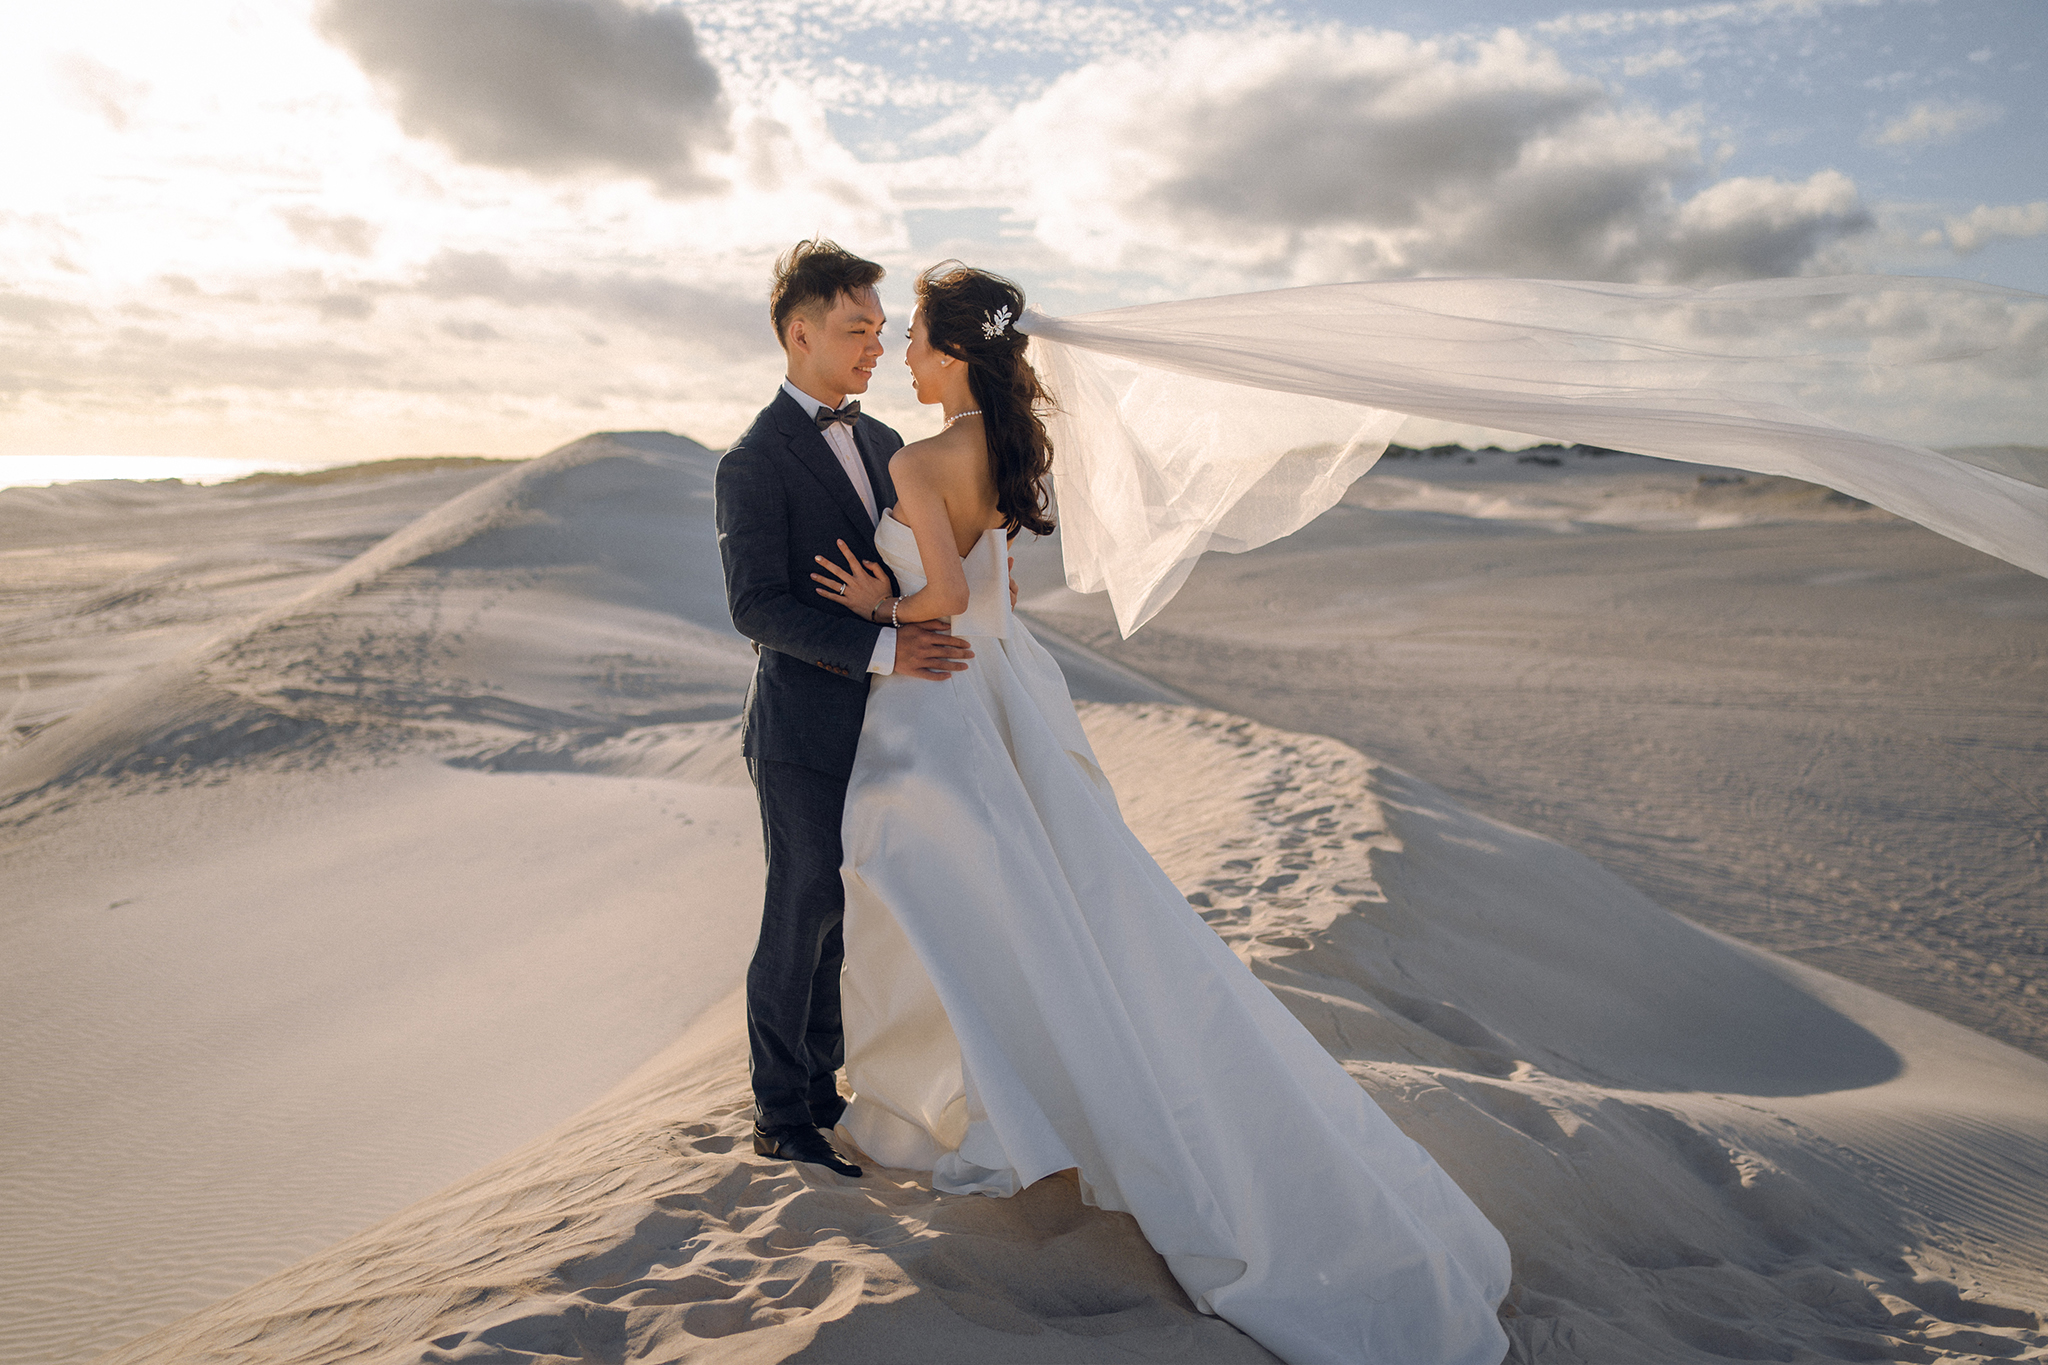 Perth Pre-Wedding Photoshoot at Lancelin Desert & Bells Lookout by Jimmy on OneThreeOneFour 24